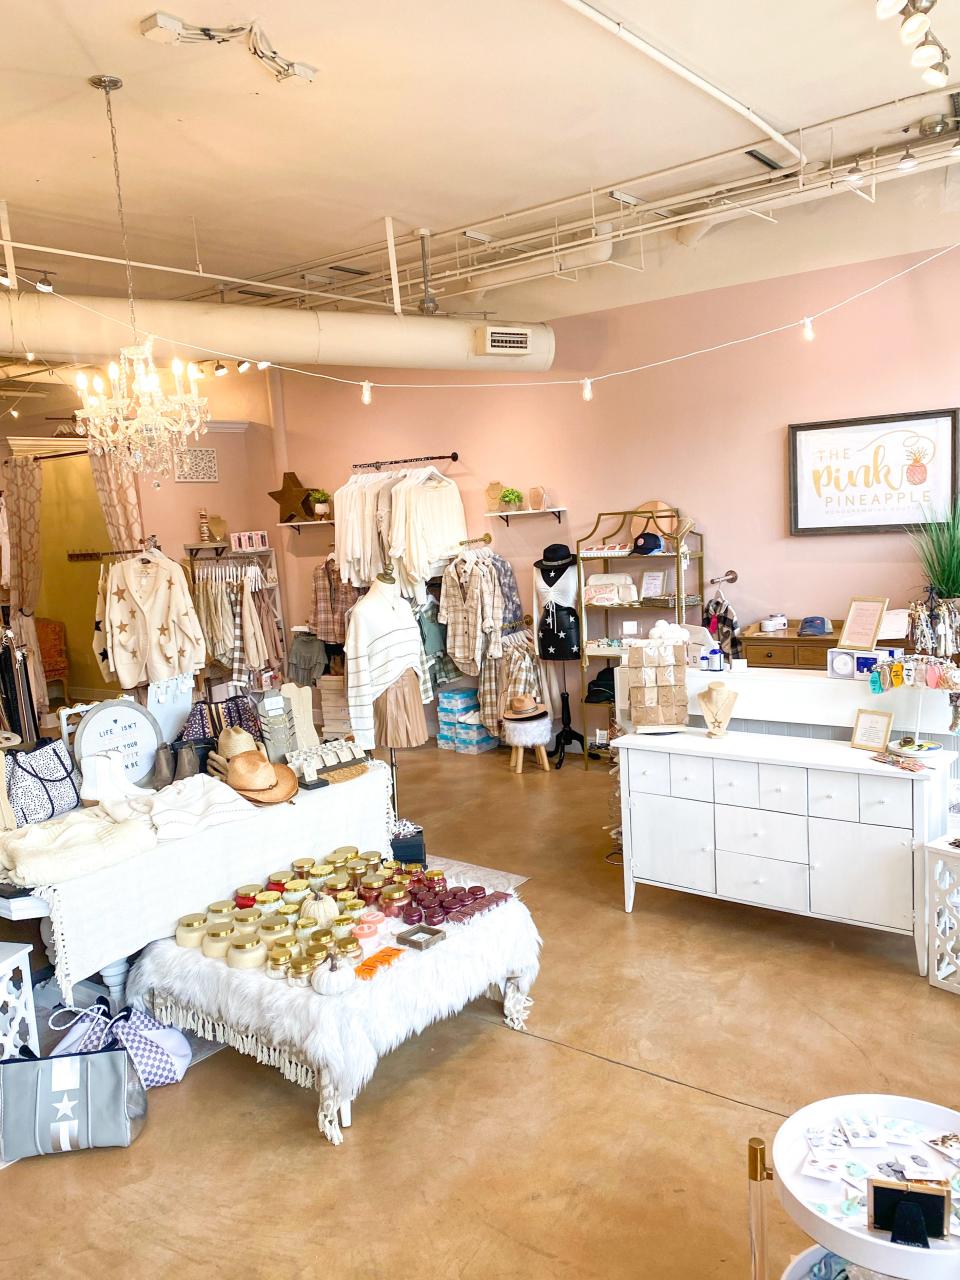 Inside the Pink Pineapple, a boutique shop located at : 1240 Thomasville Rd Suite 101.